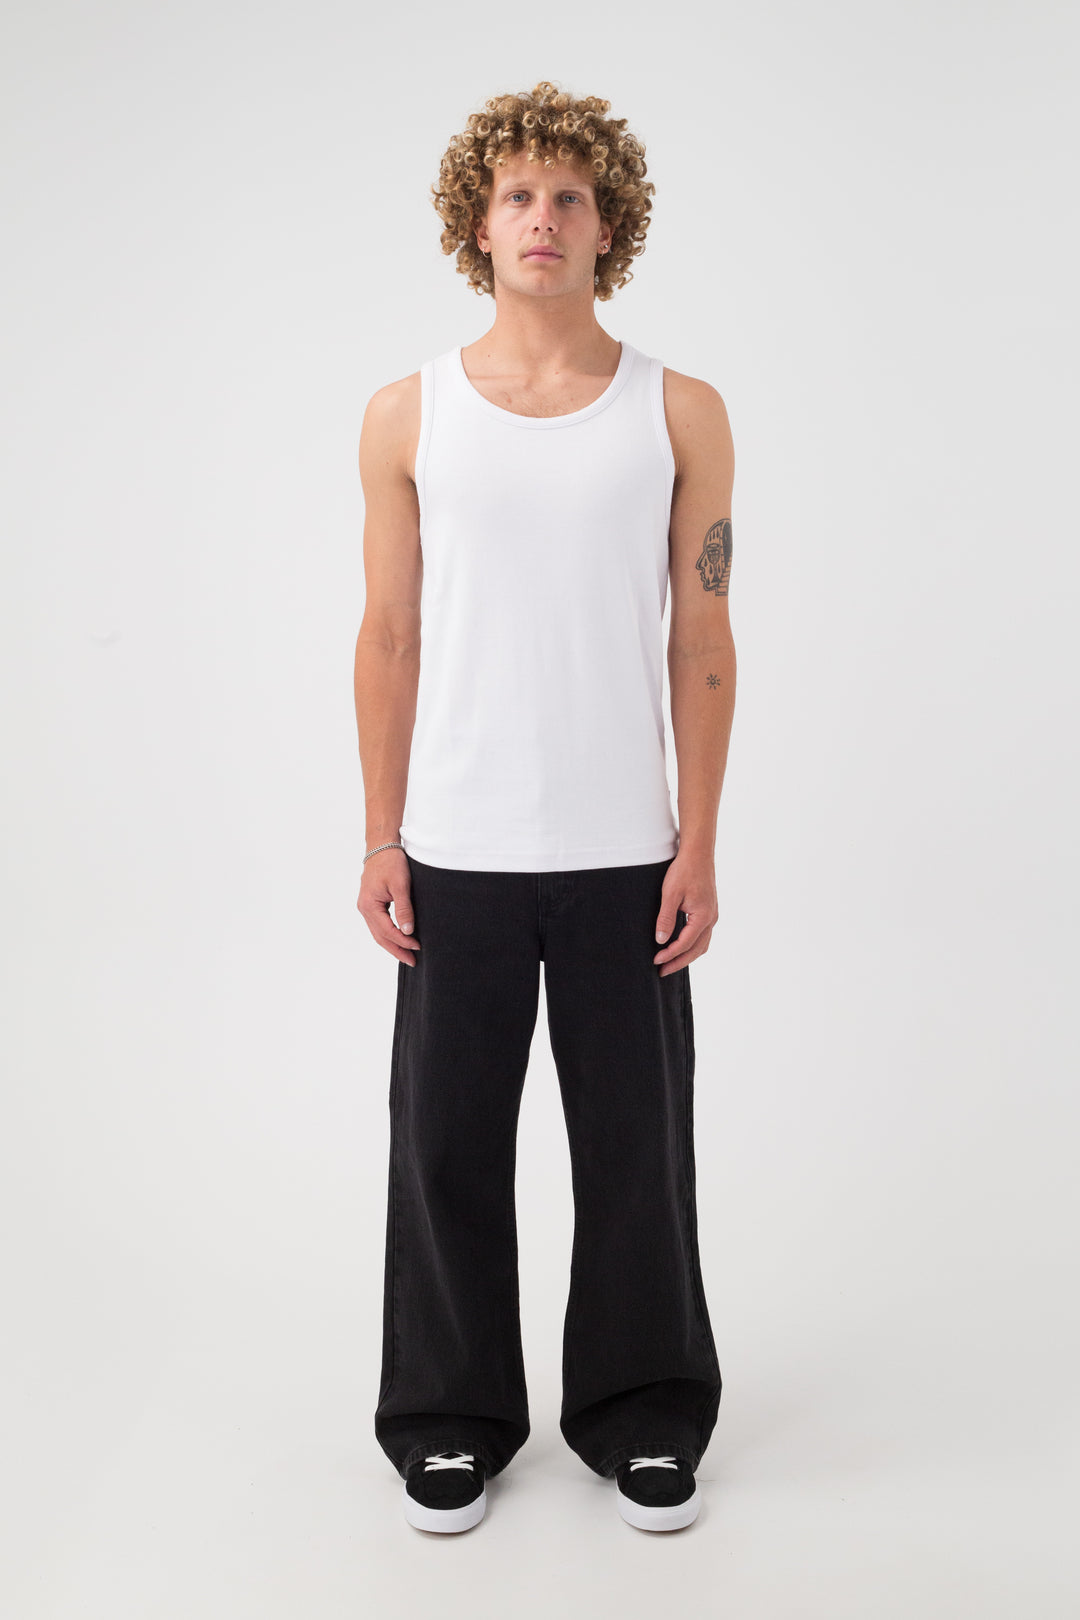 Afends Paramount Recycled Rib Singlet White